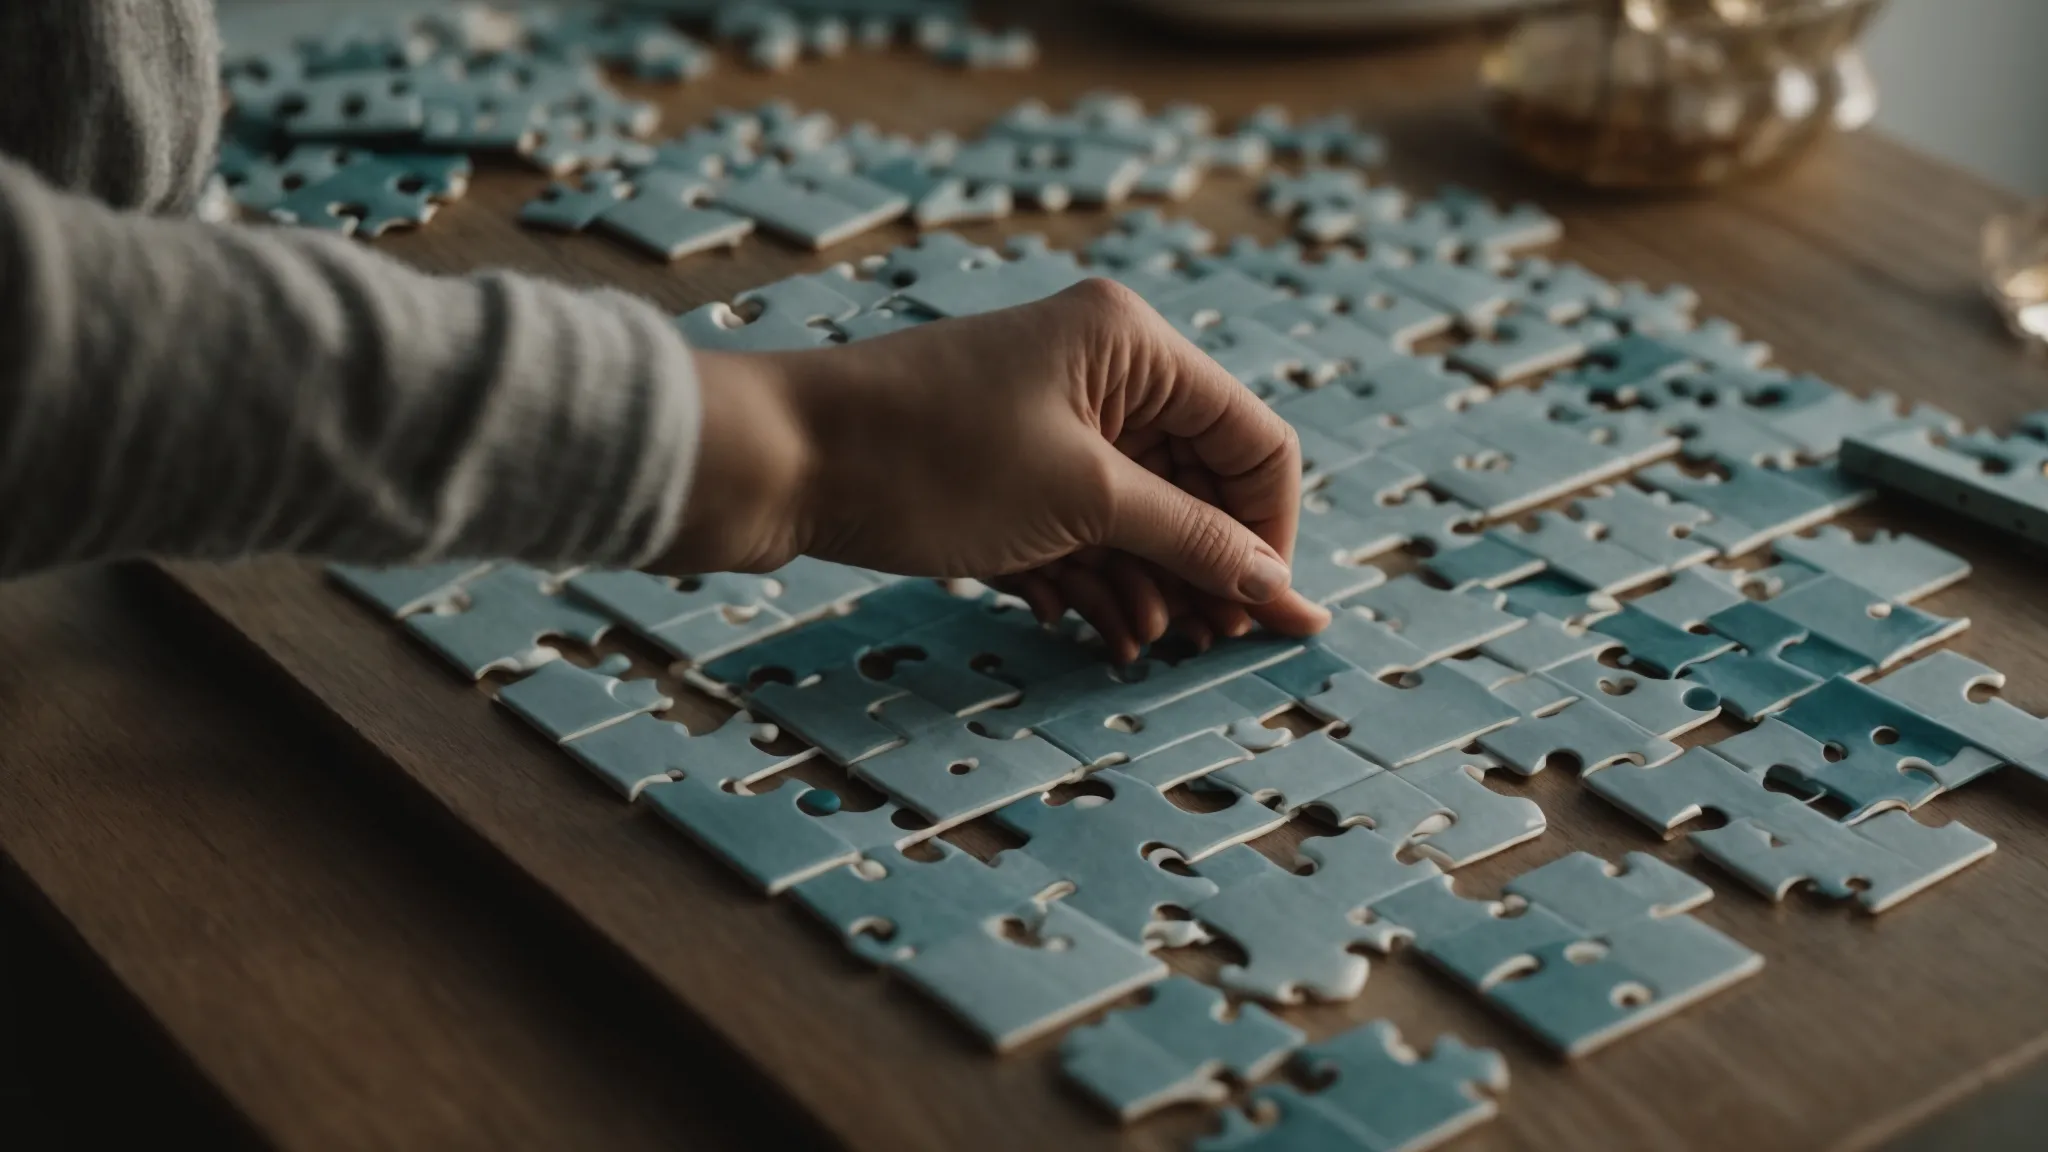 a person places a final piece into a near-complete puzzle, signaling the satisfying end of a well-structured challenge.